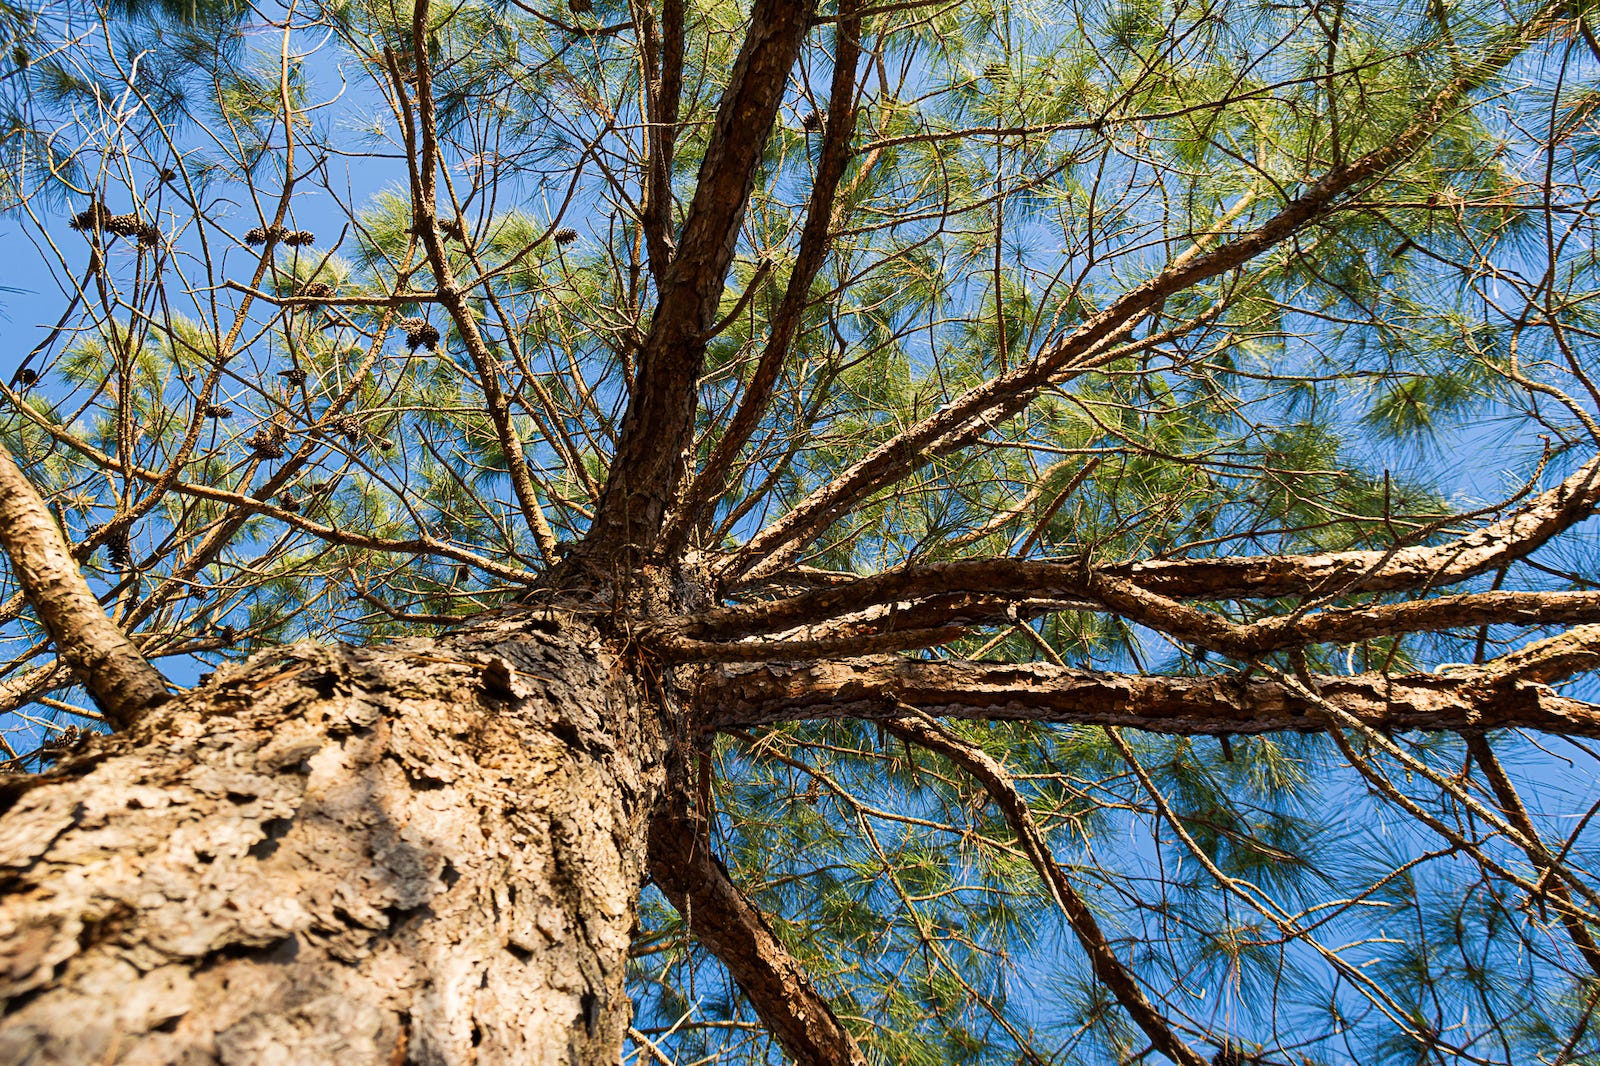 looking up at the blue sky through the branches of a pine tree with green needles and pine cones